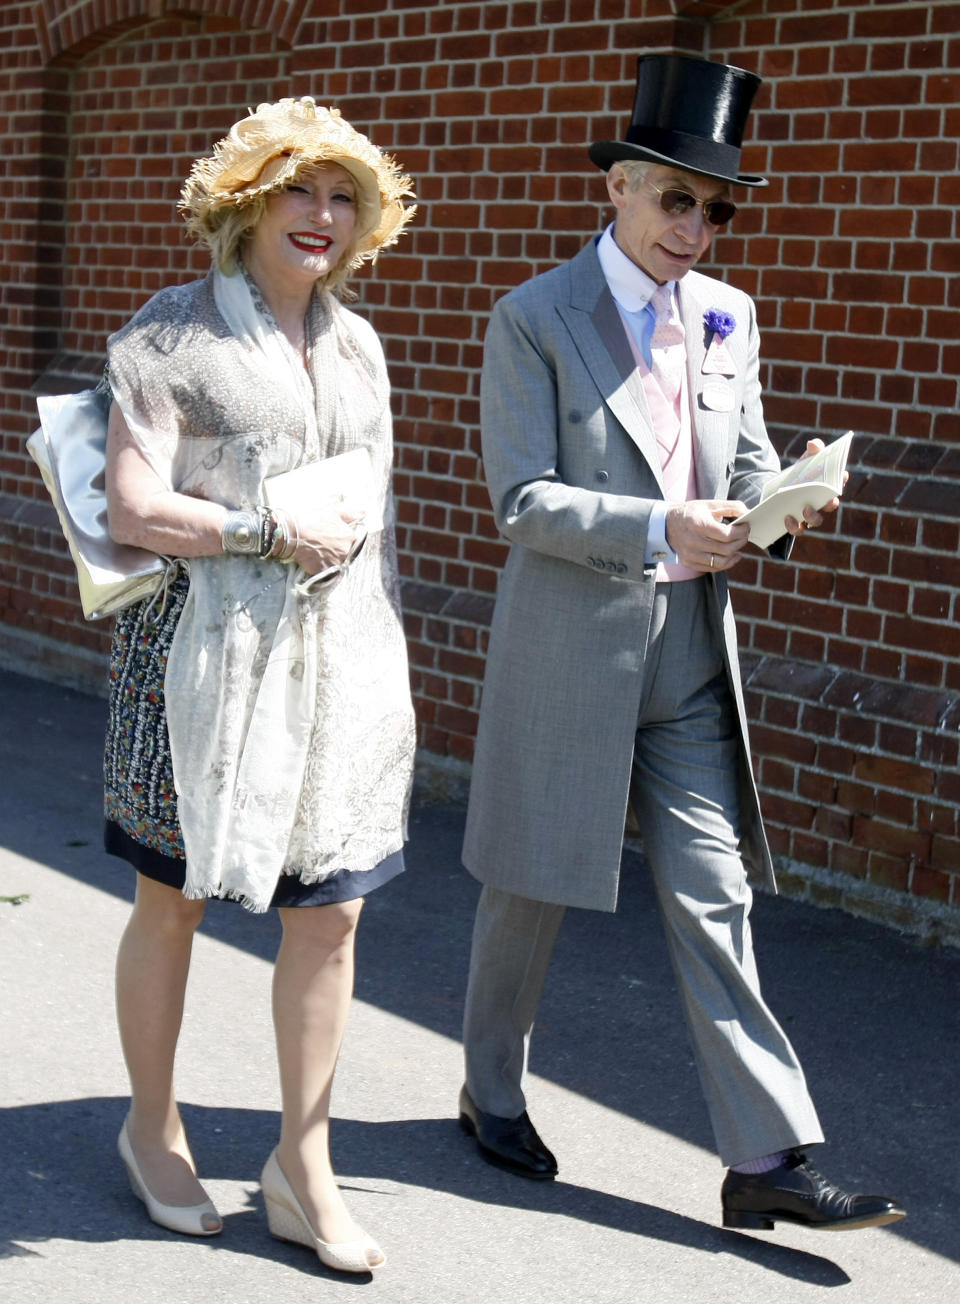 FILE - Charlie Watts, the drummer of the Rolling Stones, with his wife Shirley, arrive on the third day of the Royal Ascot horse racing meeting at Ascot, England, Thursday, June, 17, 2010. Shirley Ann Watts, a former art student and prominent breeder of Arabian horses who met drummer Charlie Watts well before he joined the Rolling Stones and with him formed one of rock's most enduring marriages, has died at age 84. "Shirley died peacefully on Friday 16th December in Devon after a short illness surrounded by her family," her family announced Monday, Dec. 19, 2022. (AP Photo/Alastair Grant, File)